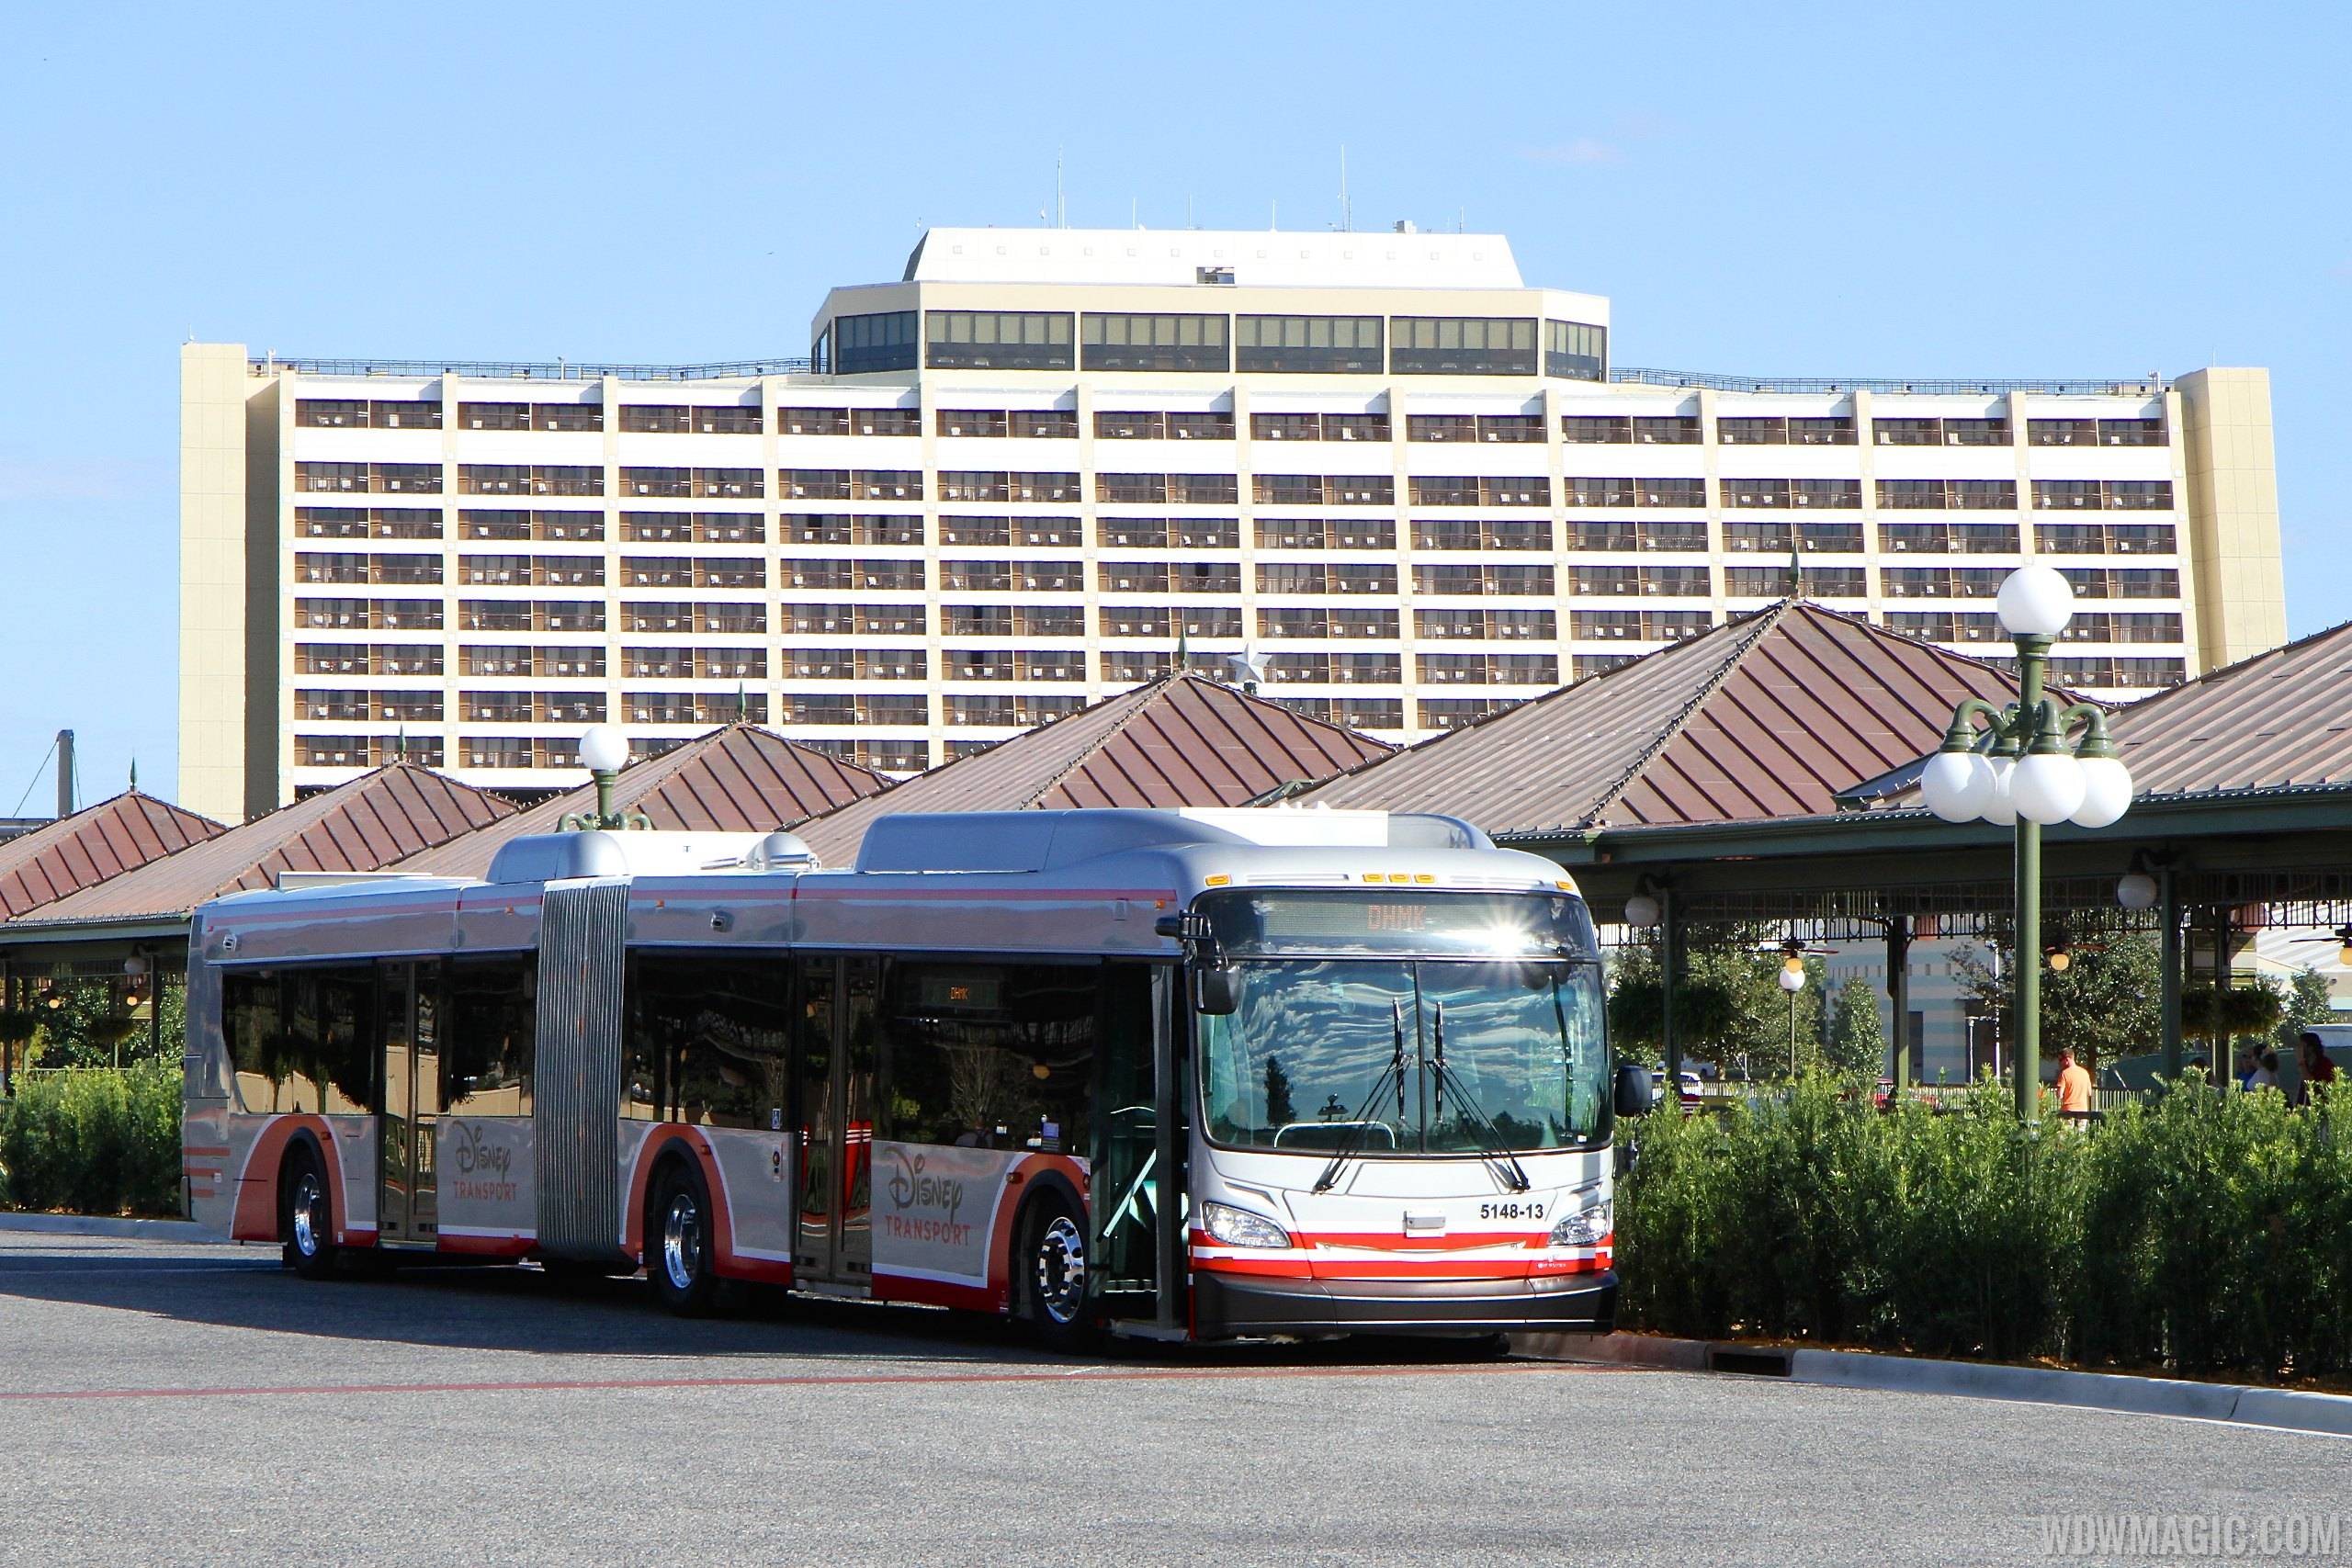 Articulated extended-length busses